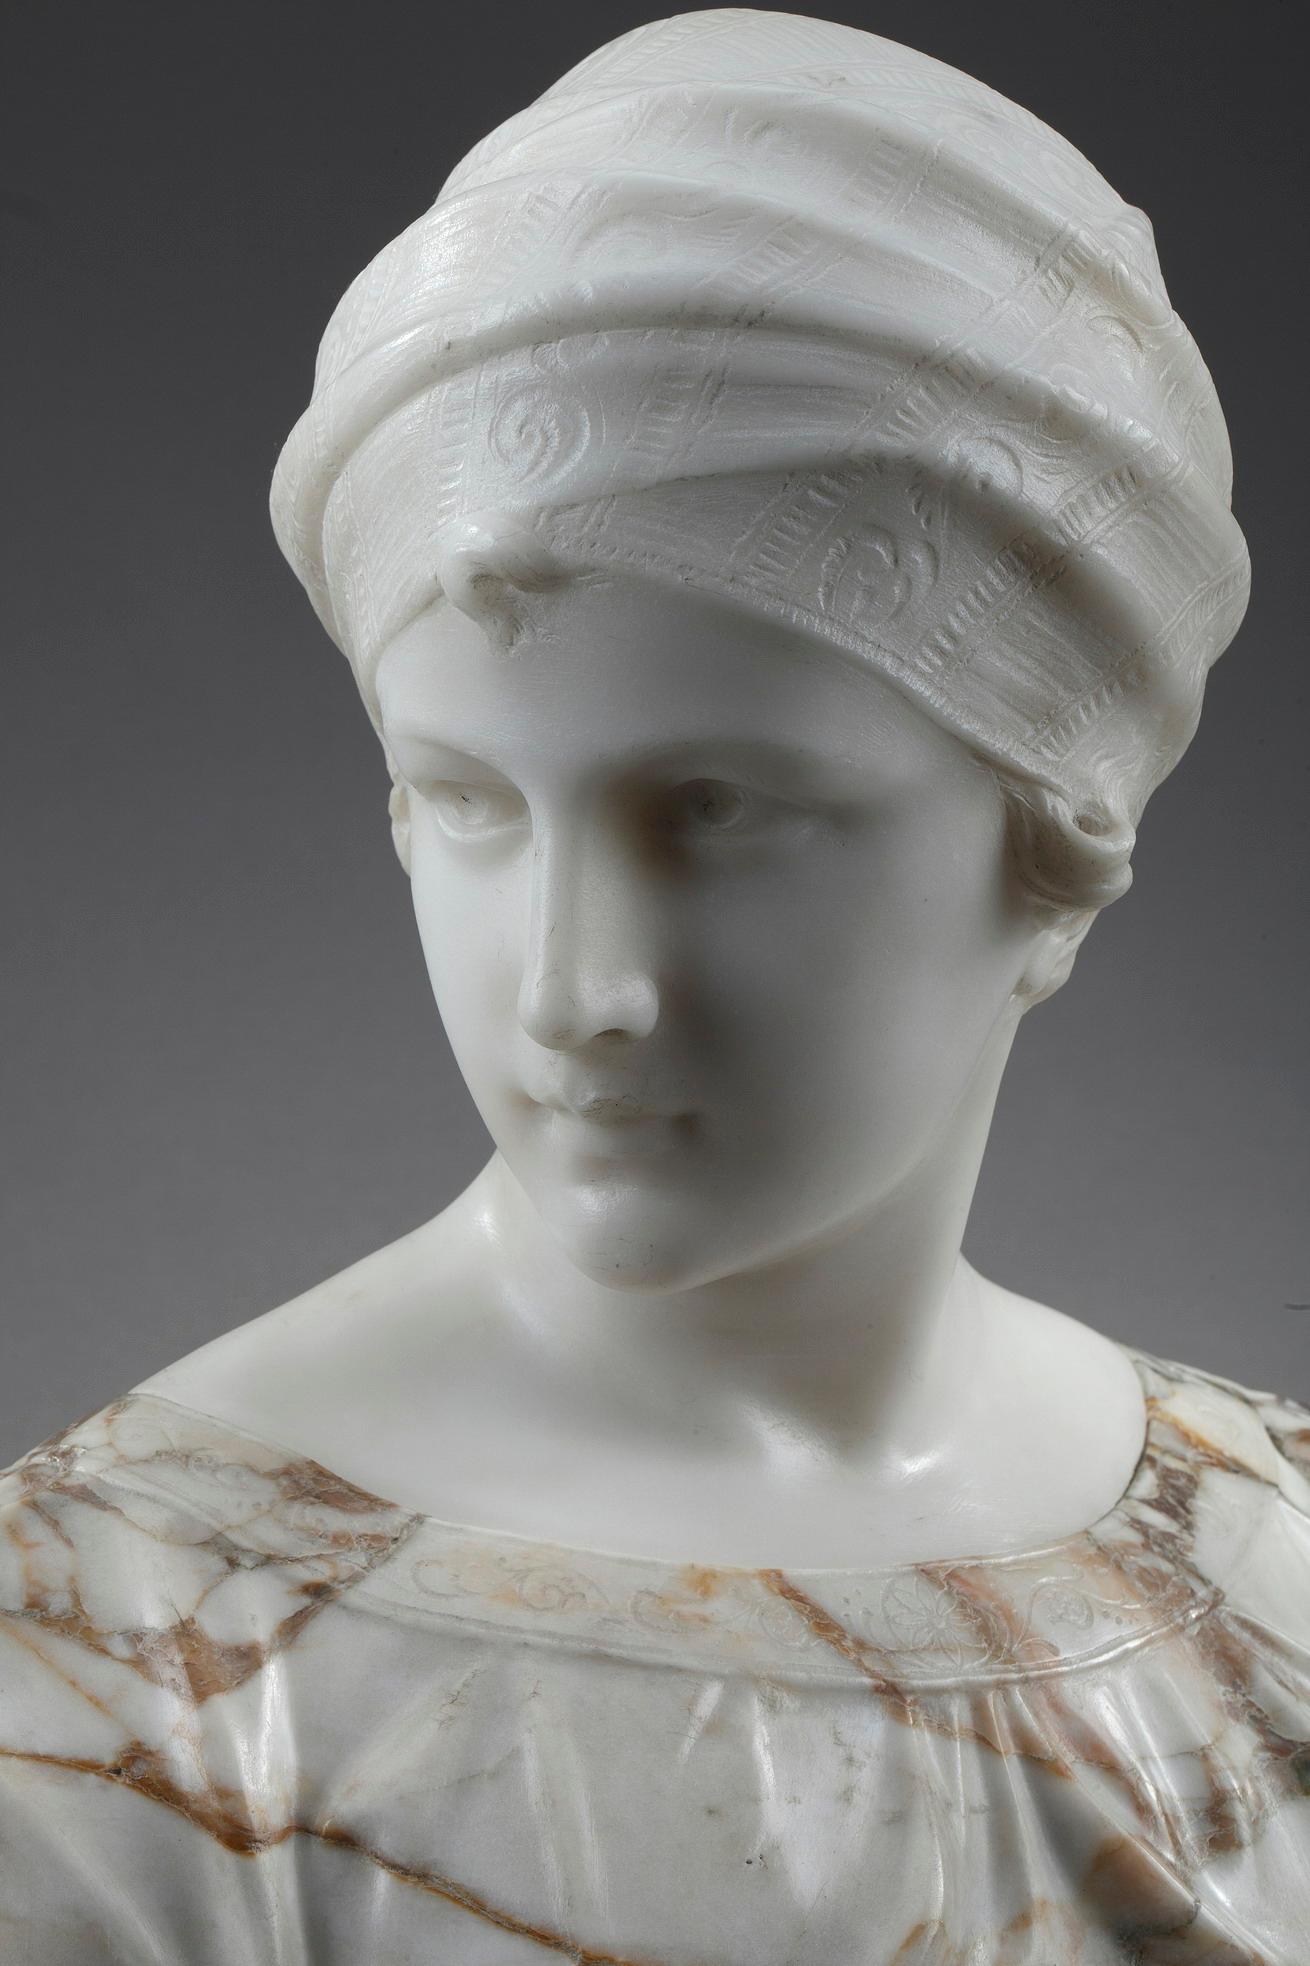 Late 19th century bust crafted in white marble and alabaster by Guglielmo Pugi (circa 1850-1915), Italian sculptor active in Florence between 1870 and 1915. The portrait captures the noble visage of a woman wearing a turban. The turban and dress are